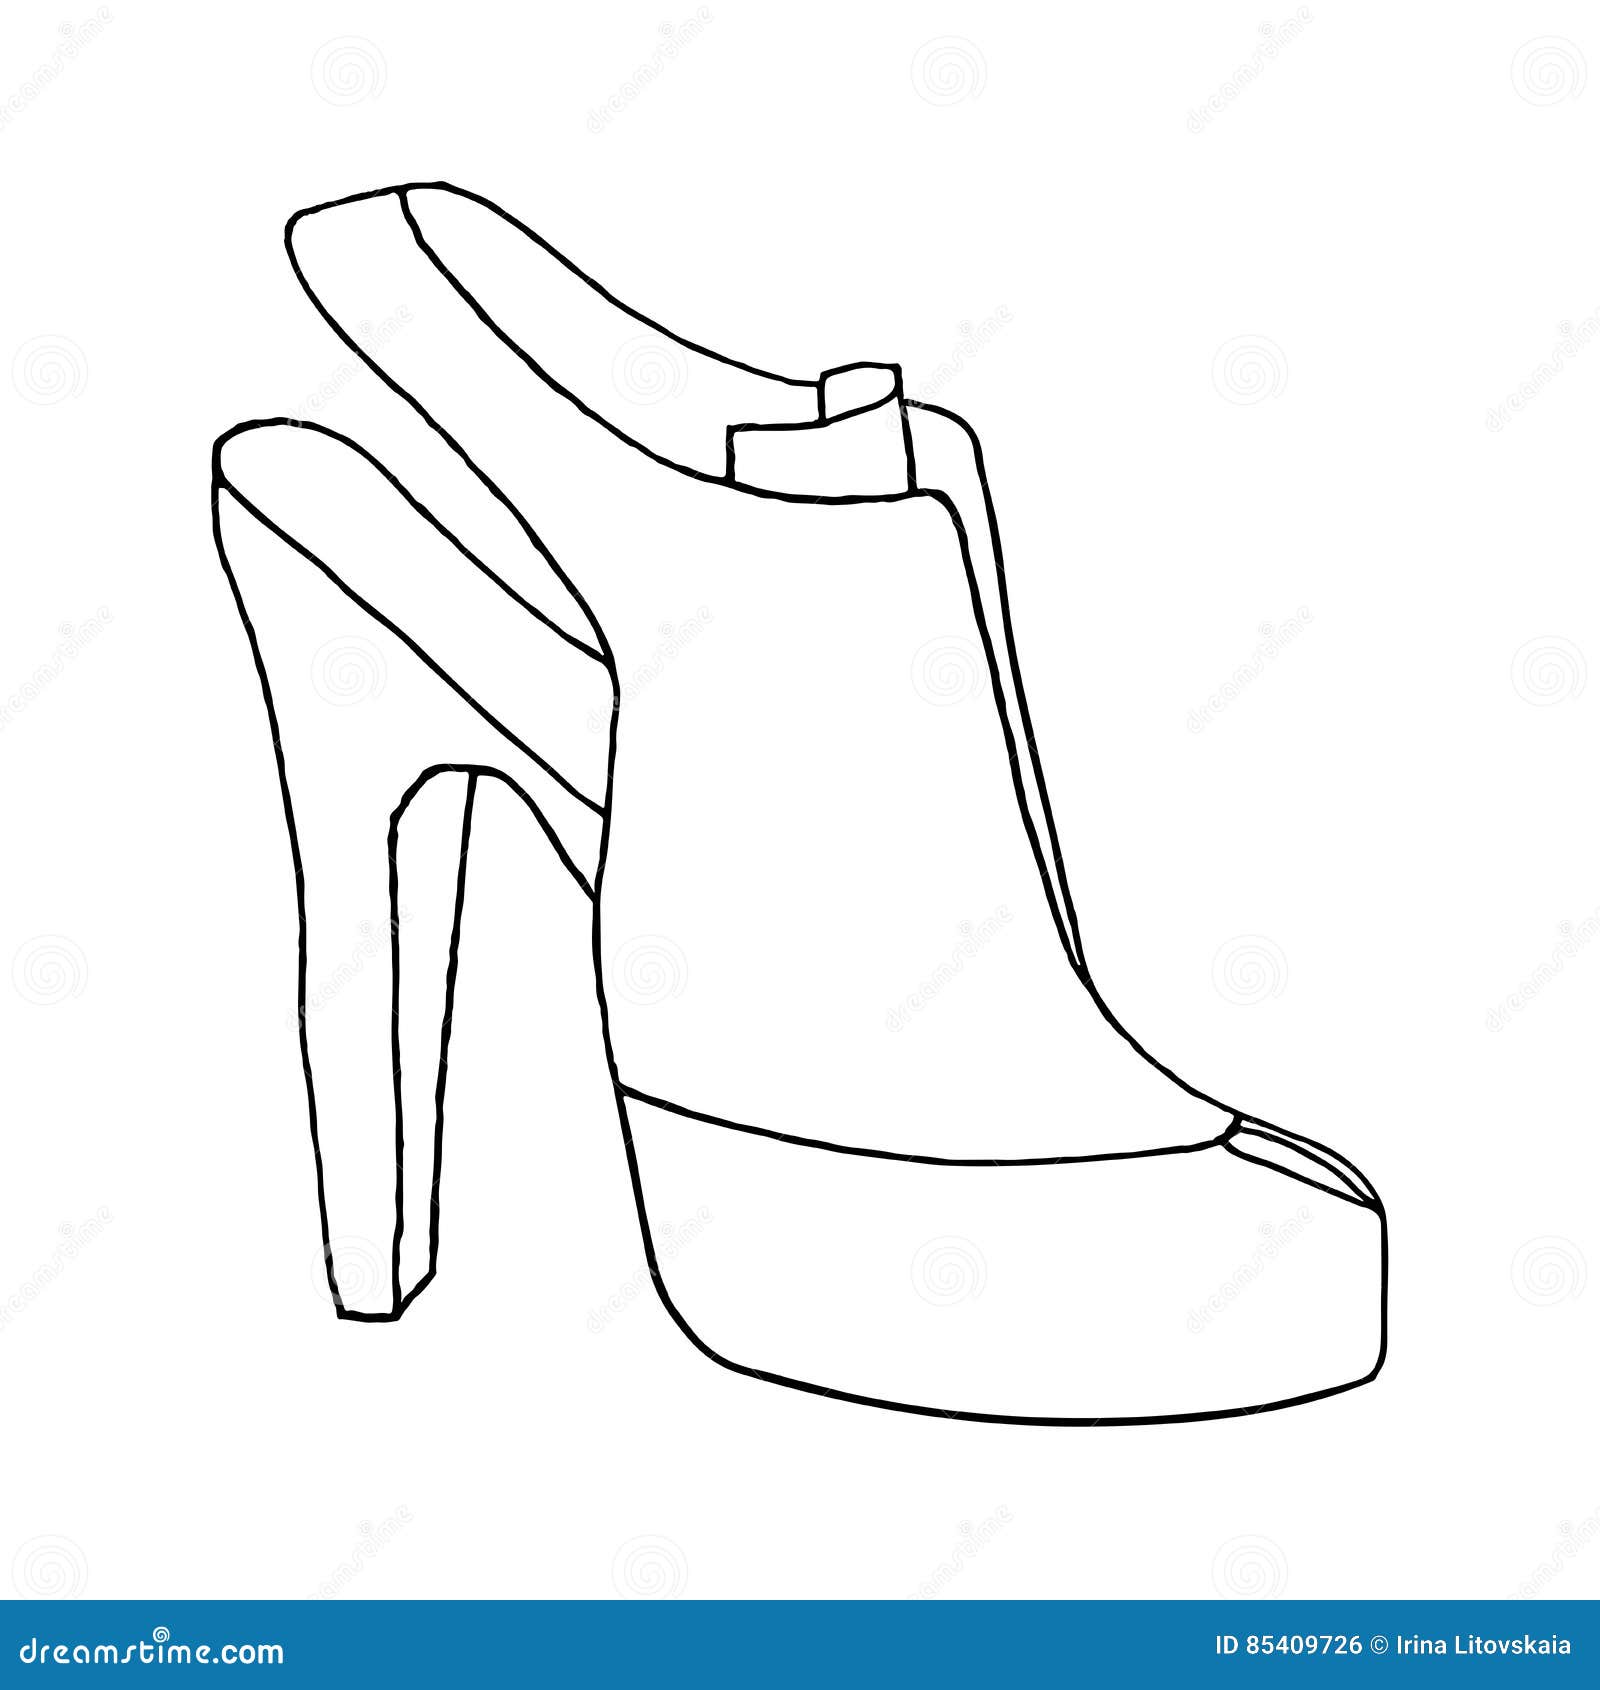 How to Draw High Heels - DrawingNow